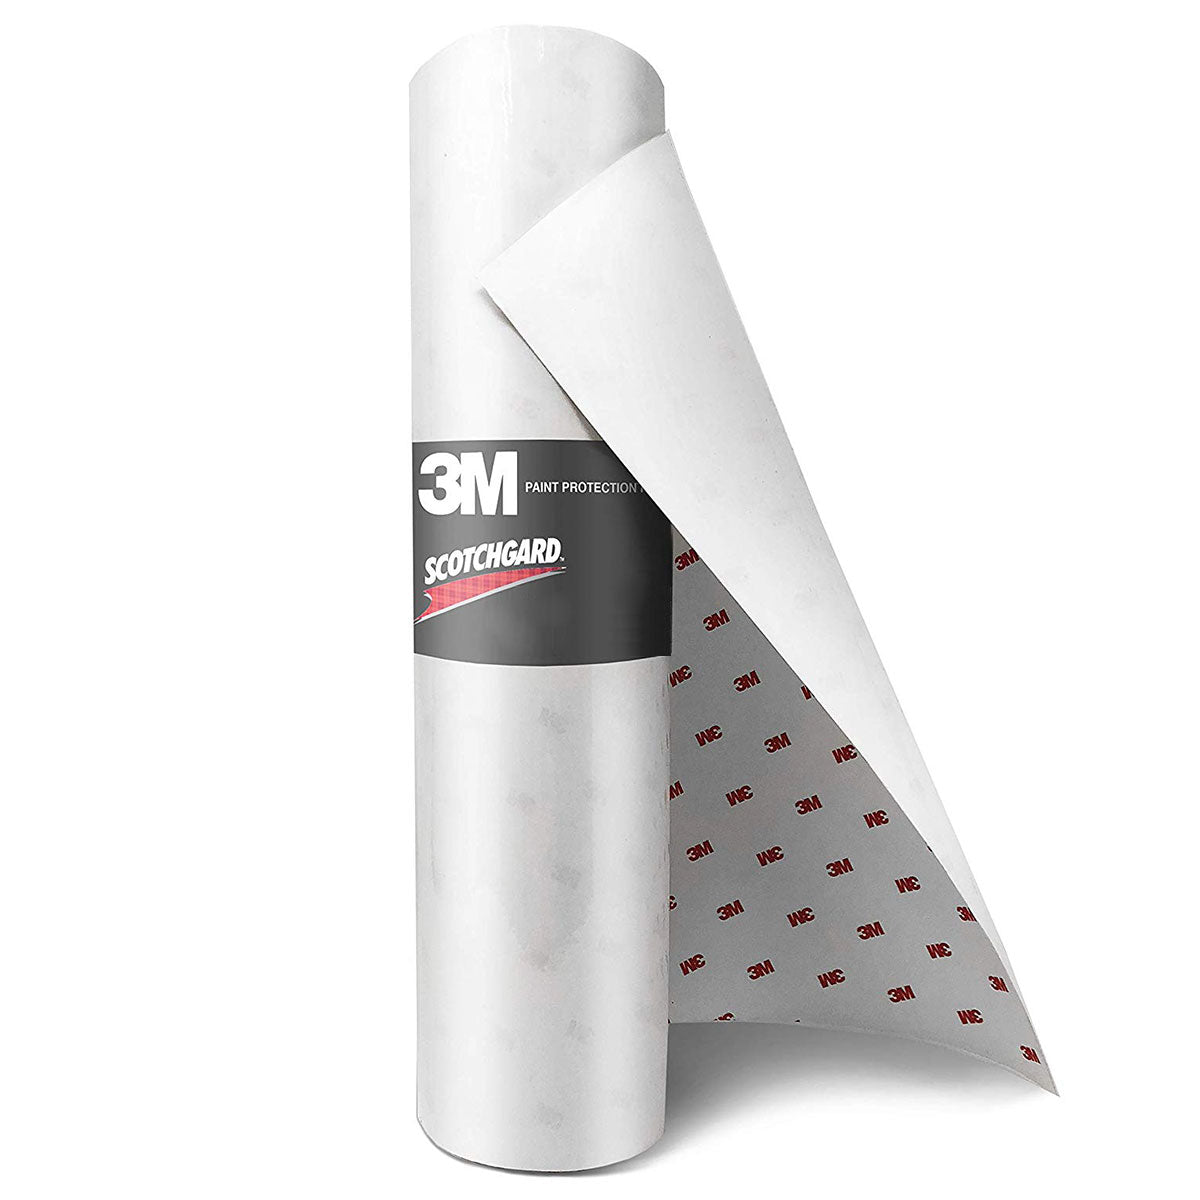 SCOTCHGARD 95904 Pro Series Paint Protection Film, 10 ft x 4 in, 0.2 mm  THK, Clear